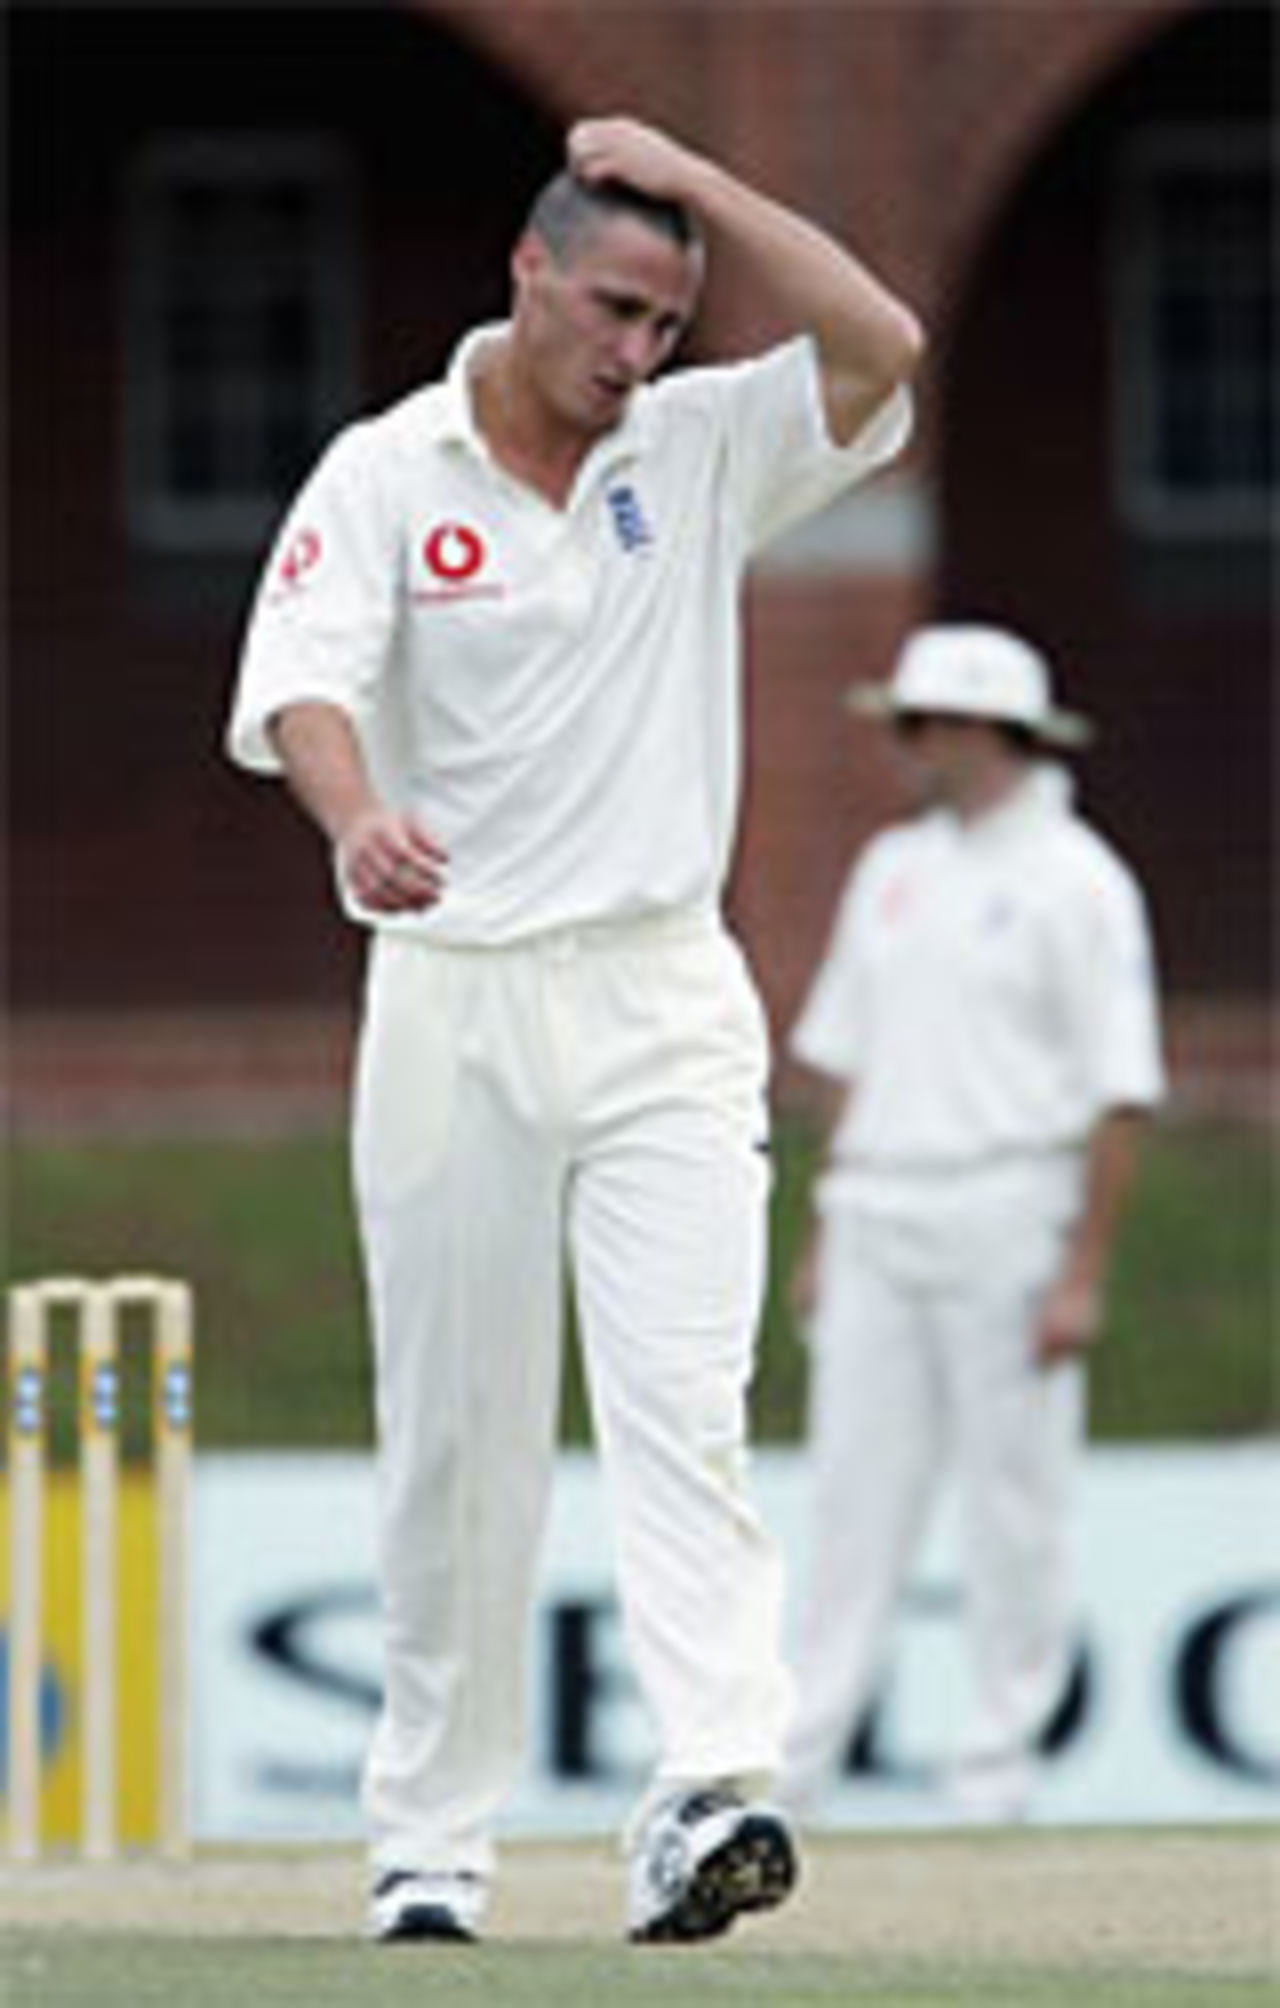 Simon Jones is frustrated as England teeter on the brink against South Africa A, Potchefstroom, December 13, 2004